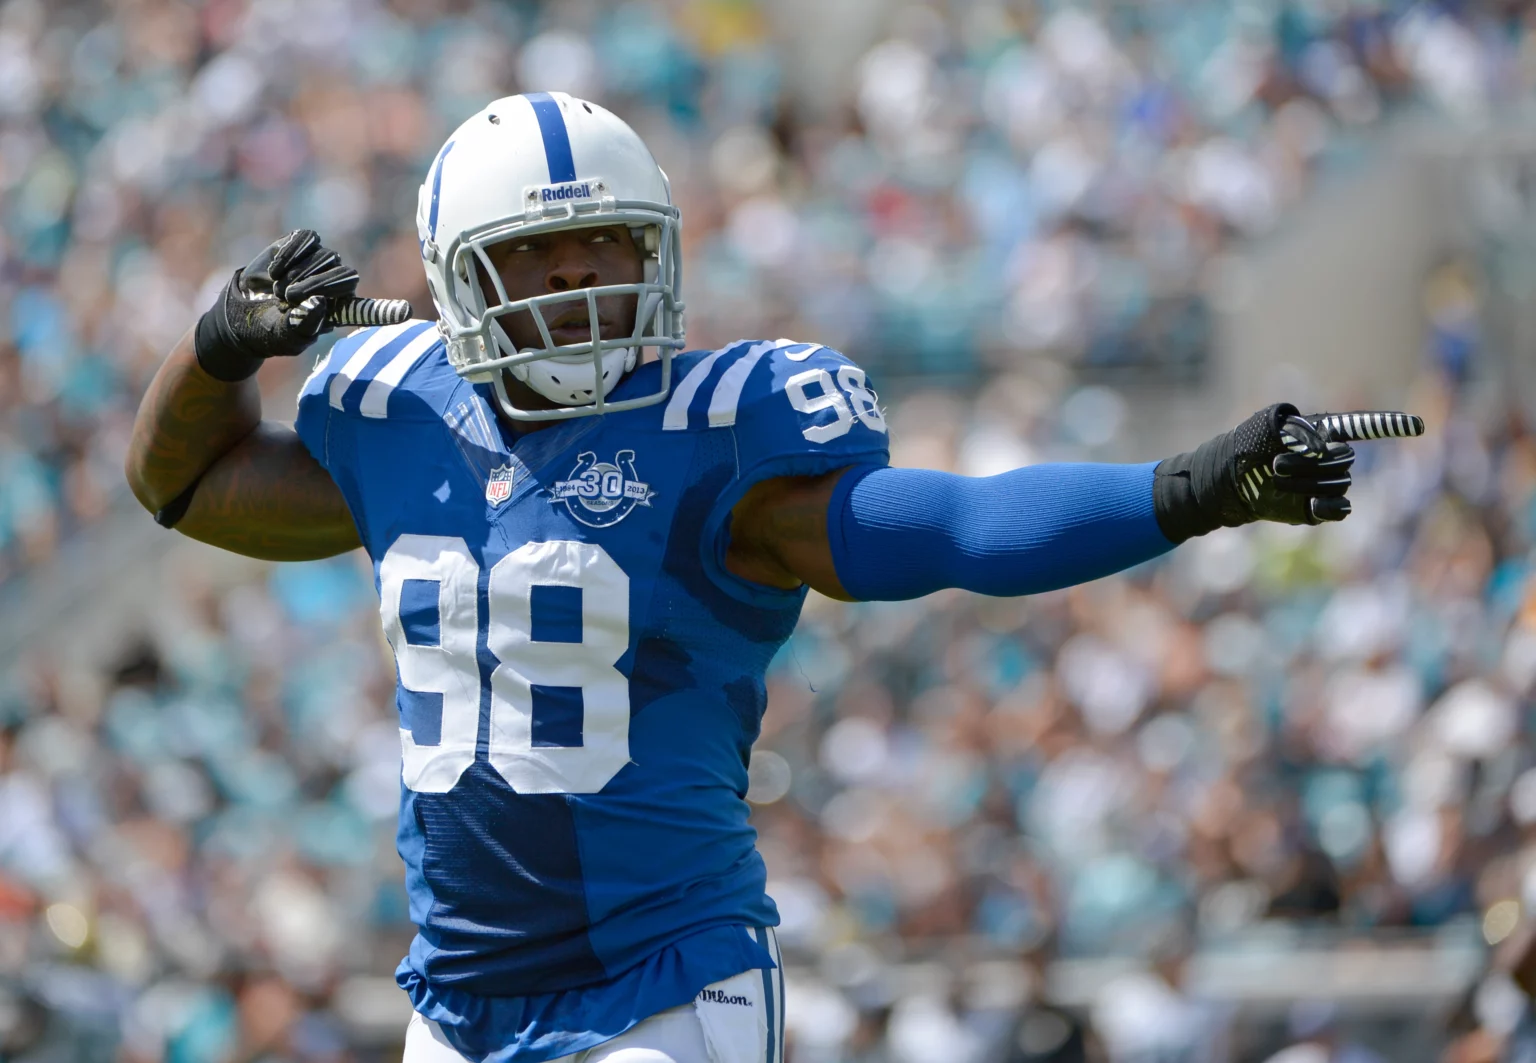 Best Players to Wear 98 in NFL History robert mathis